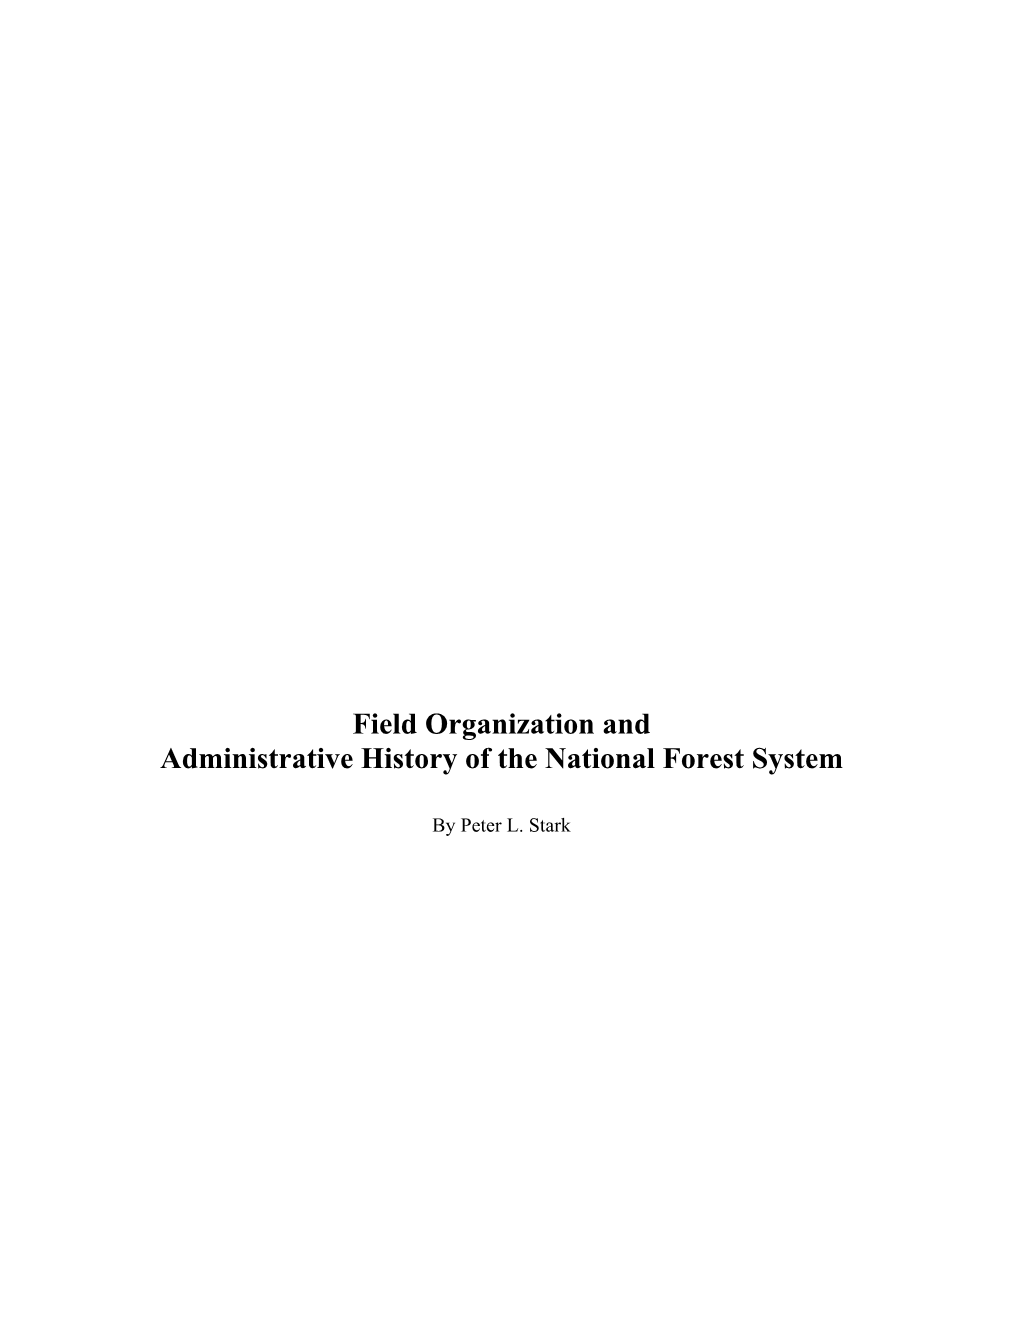 Field Organization and Administrative History of the National Forest System